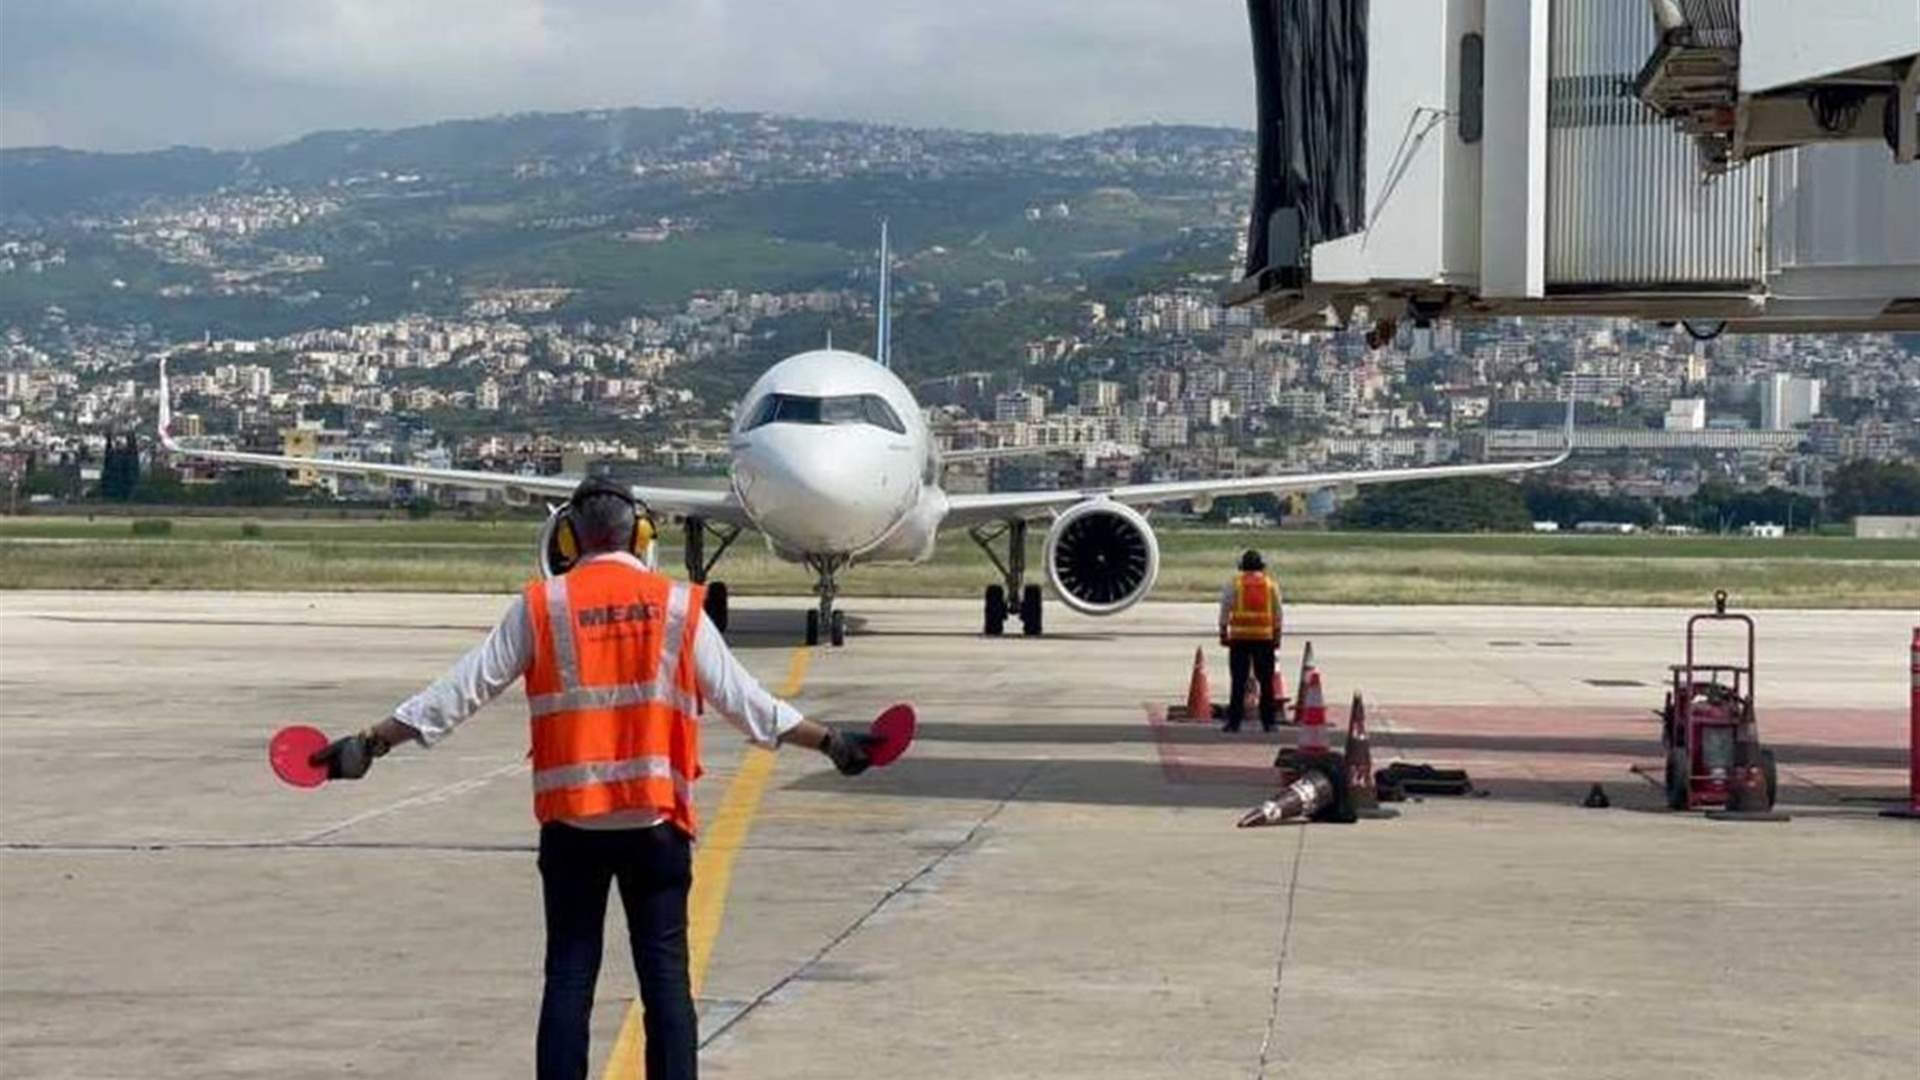 Safety concerns: Interference with Lebanon&#39;s navigation system causes &#39;panic&#39; on flight to Beirut